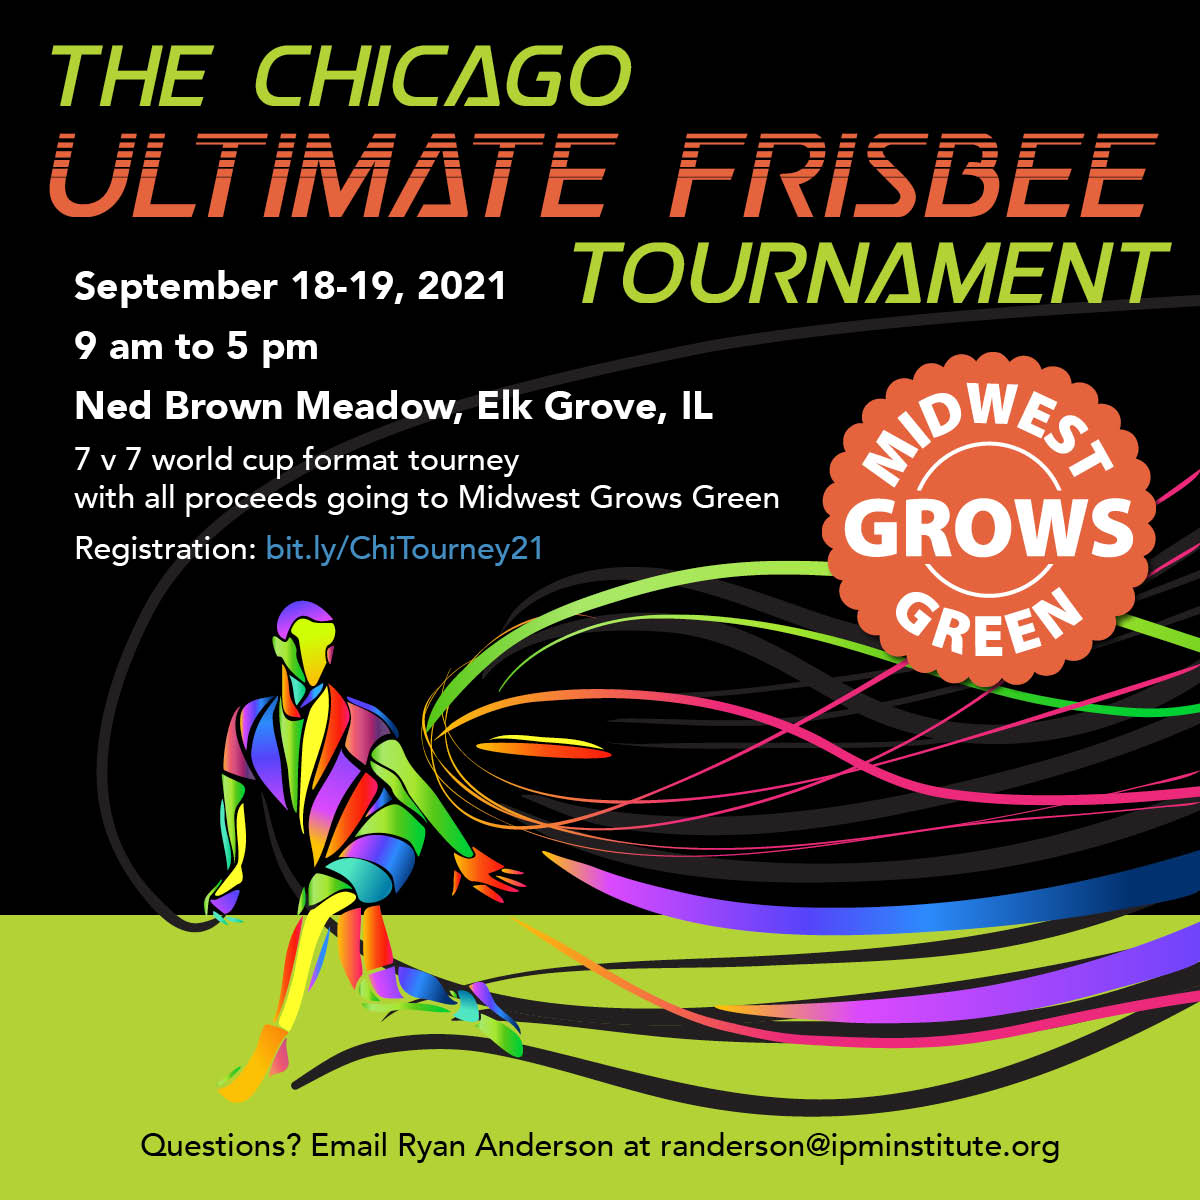 The Chicago Ultimate Frisbee Tournament